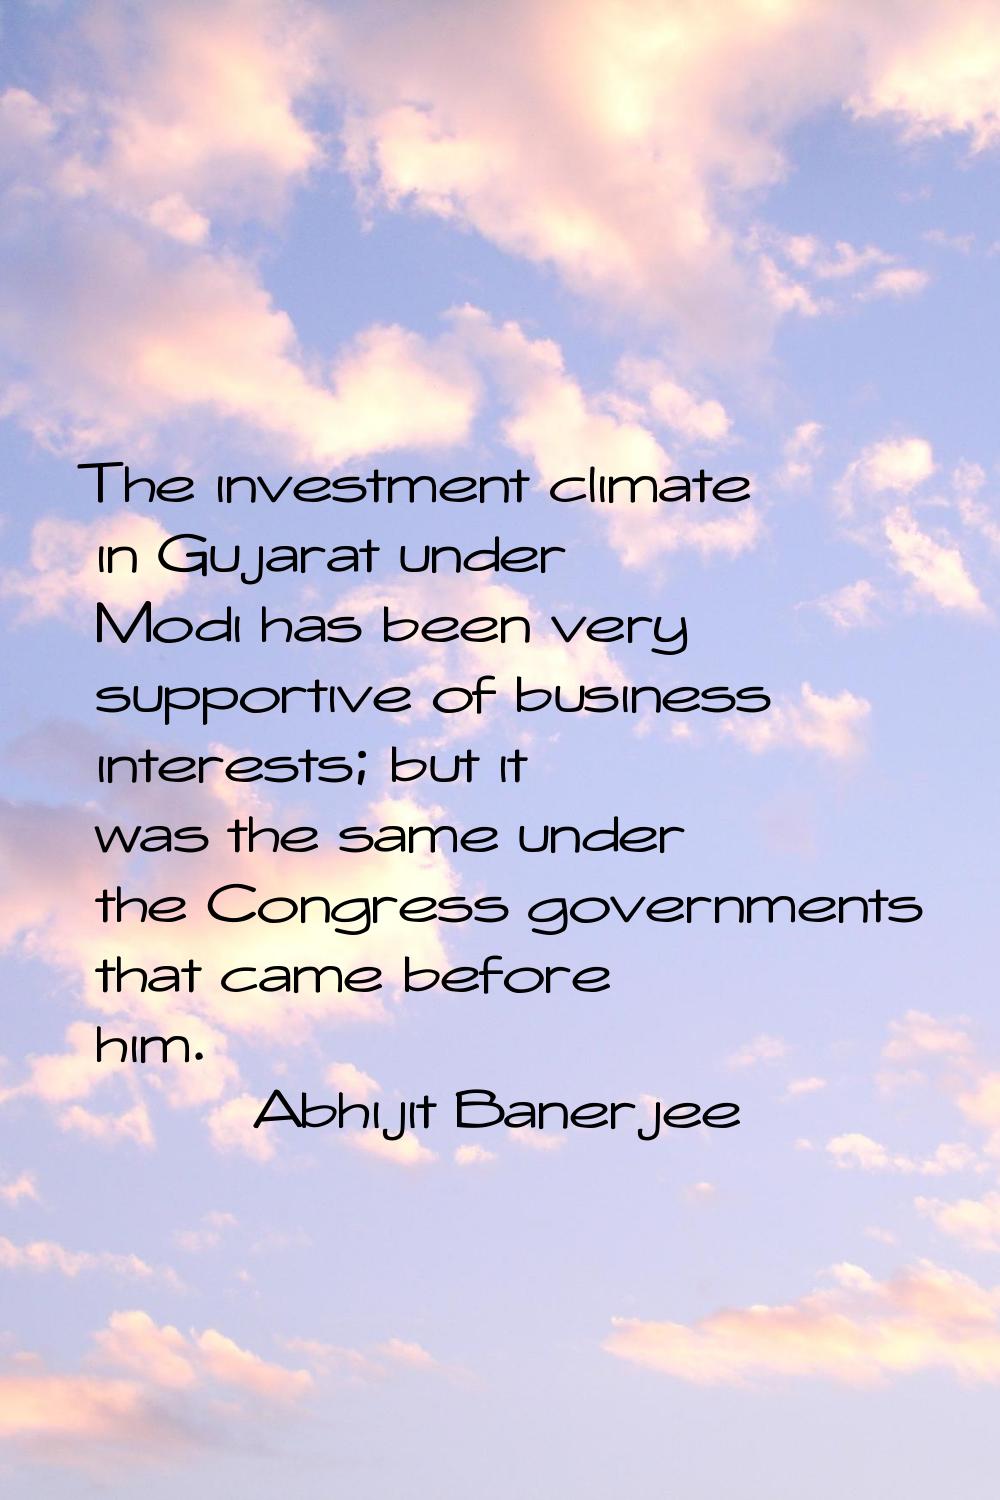 The investment climate in Gujarat under Modi has been very supportive of business interests; but it